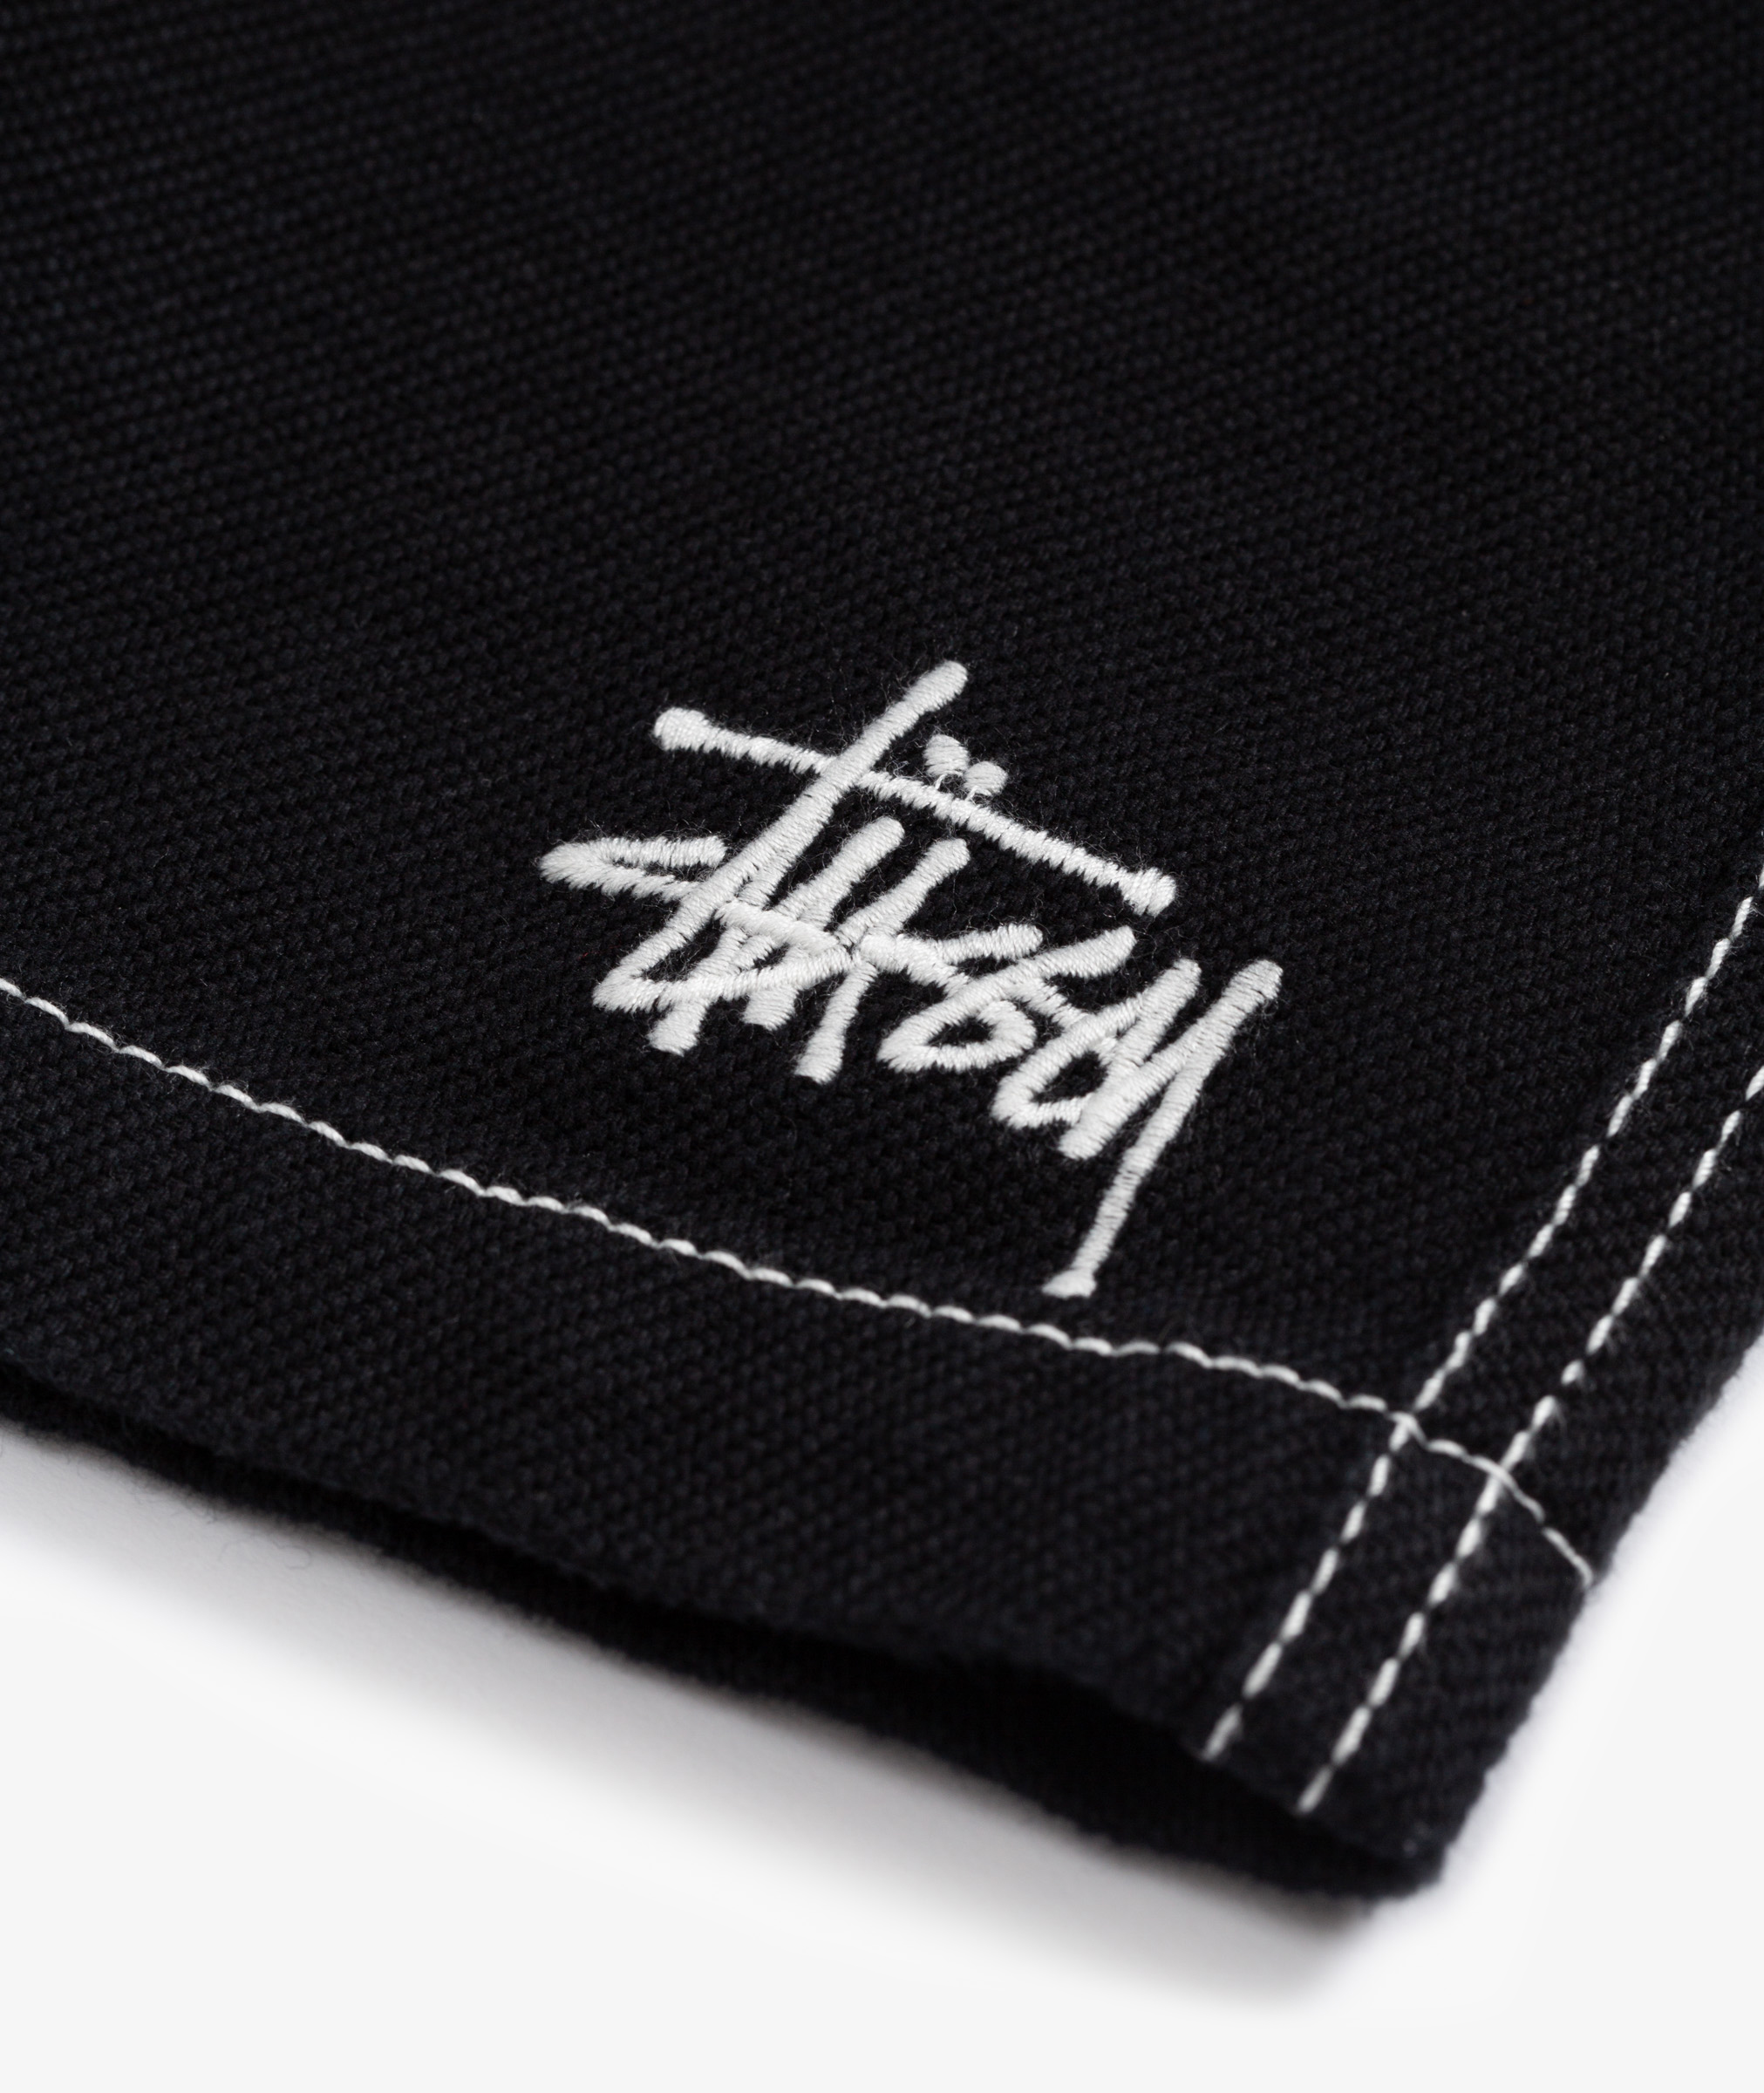 Norse Store | Shipping Worldwide - Stüssy Loose Twill Mountain 